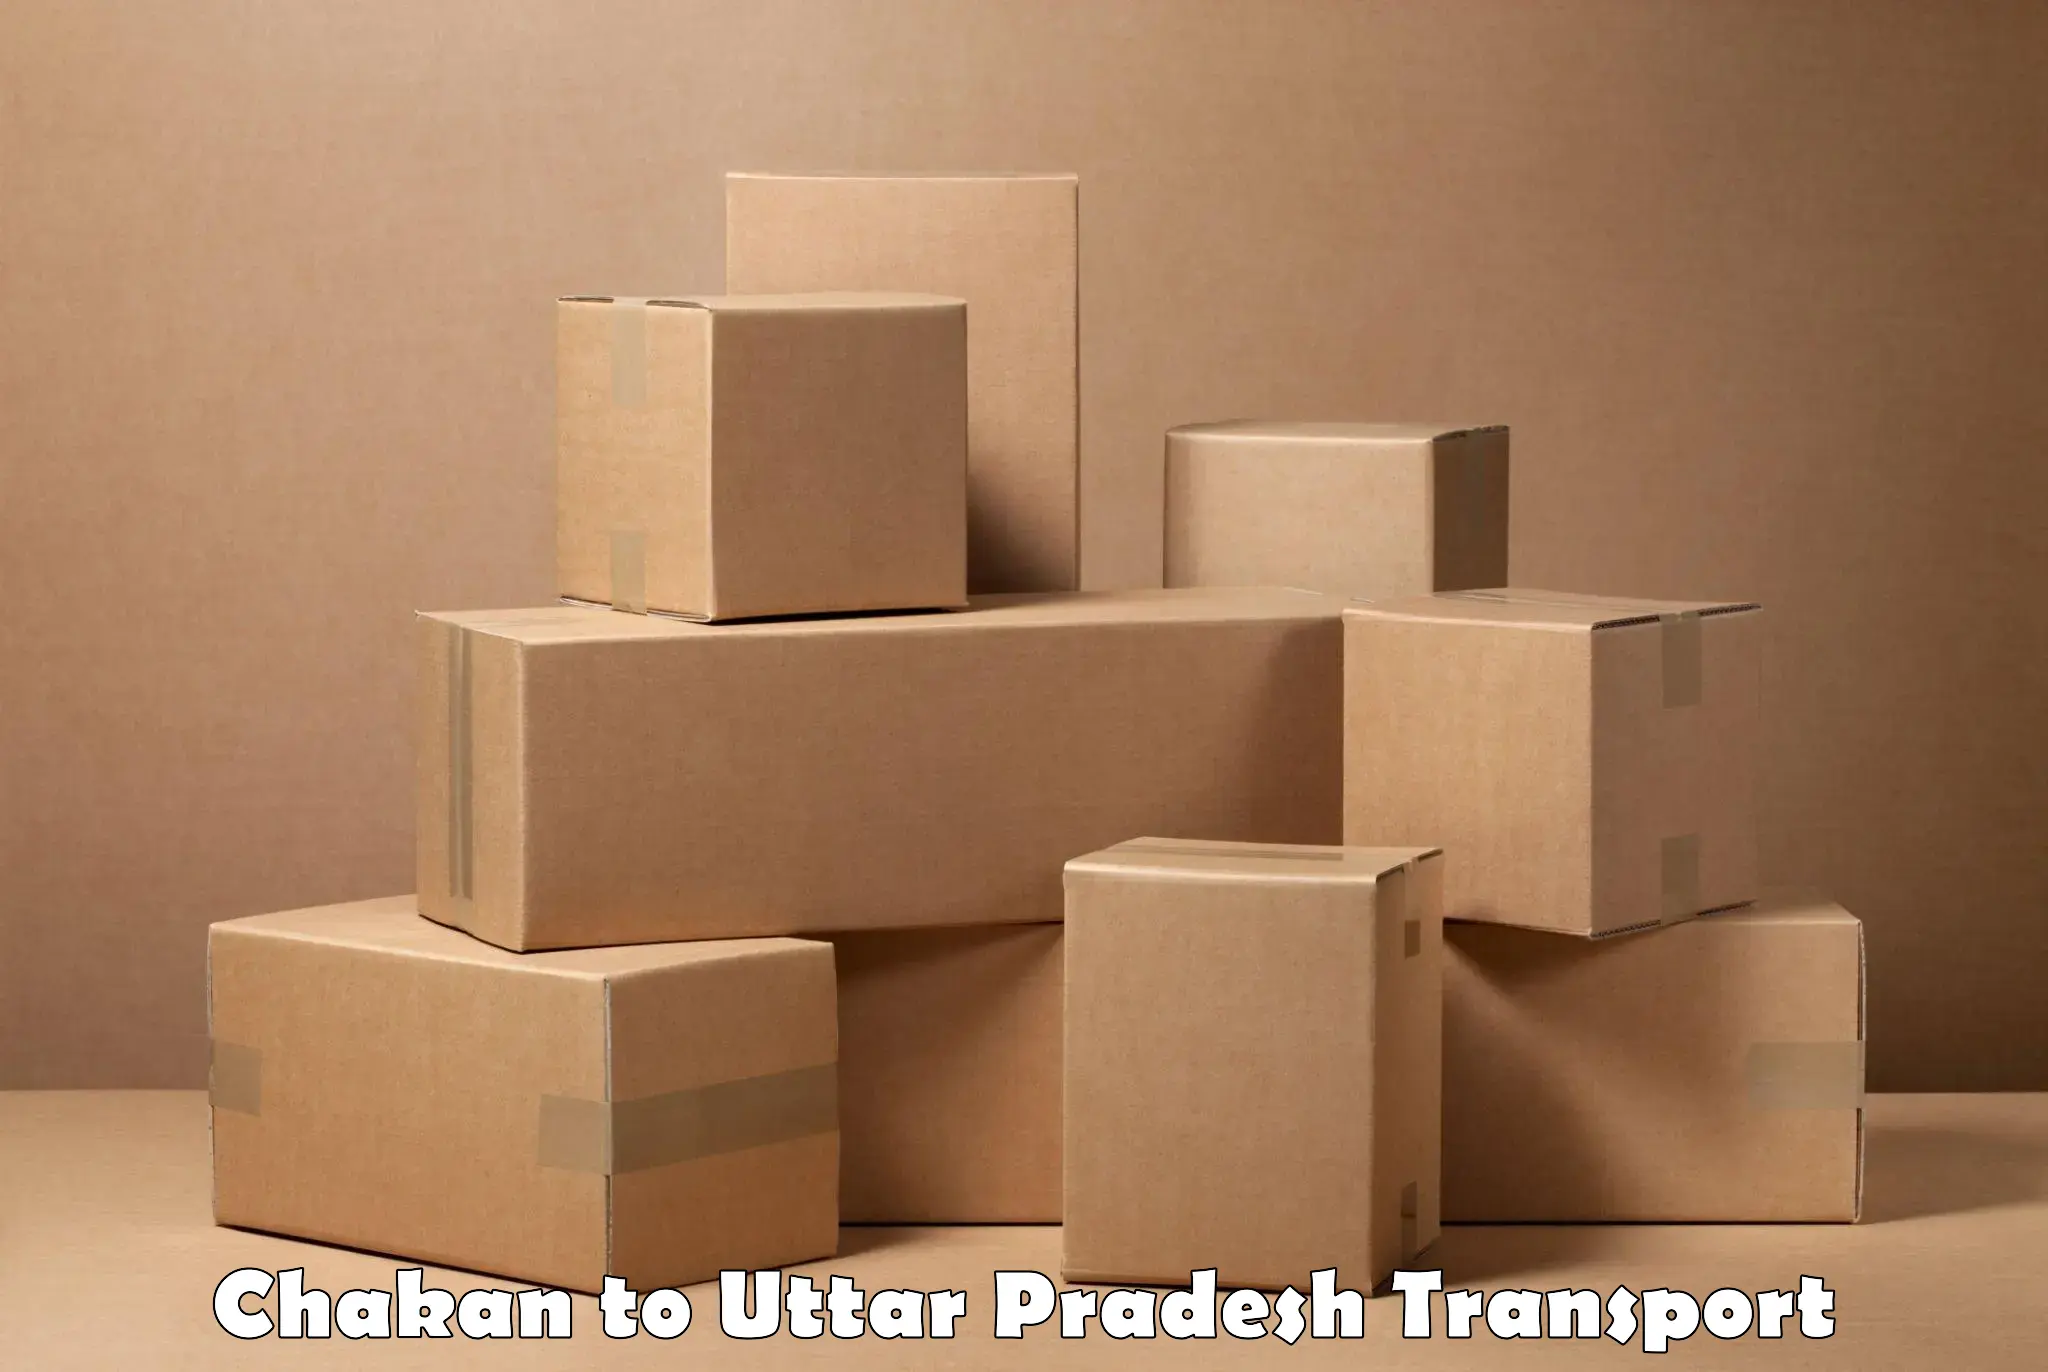 Truck transport companies in India Chakan to Baghpat